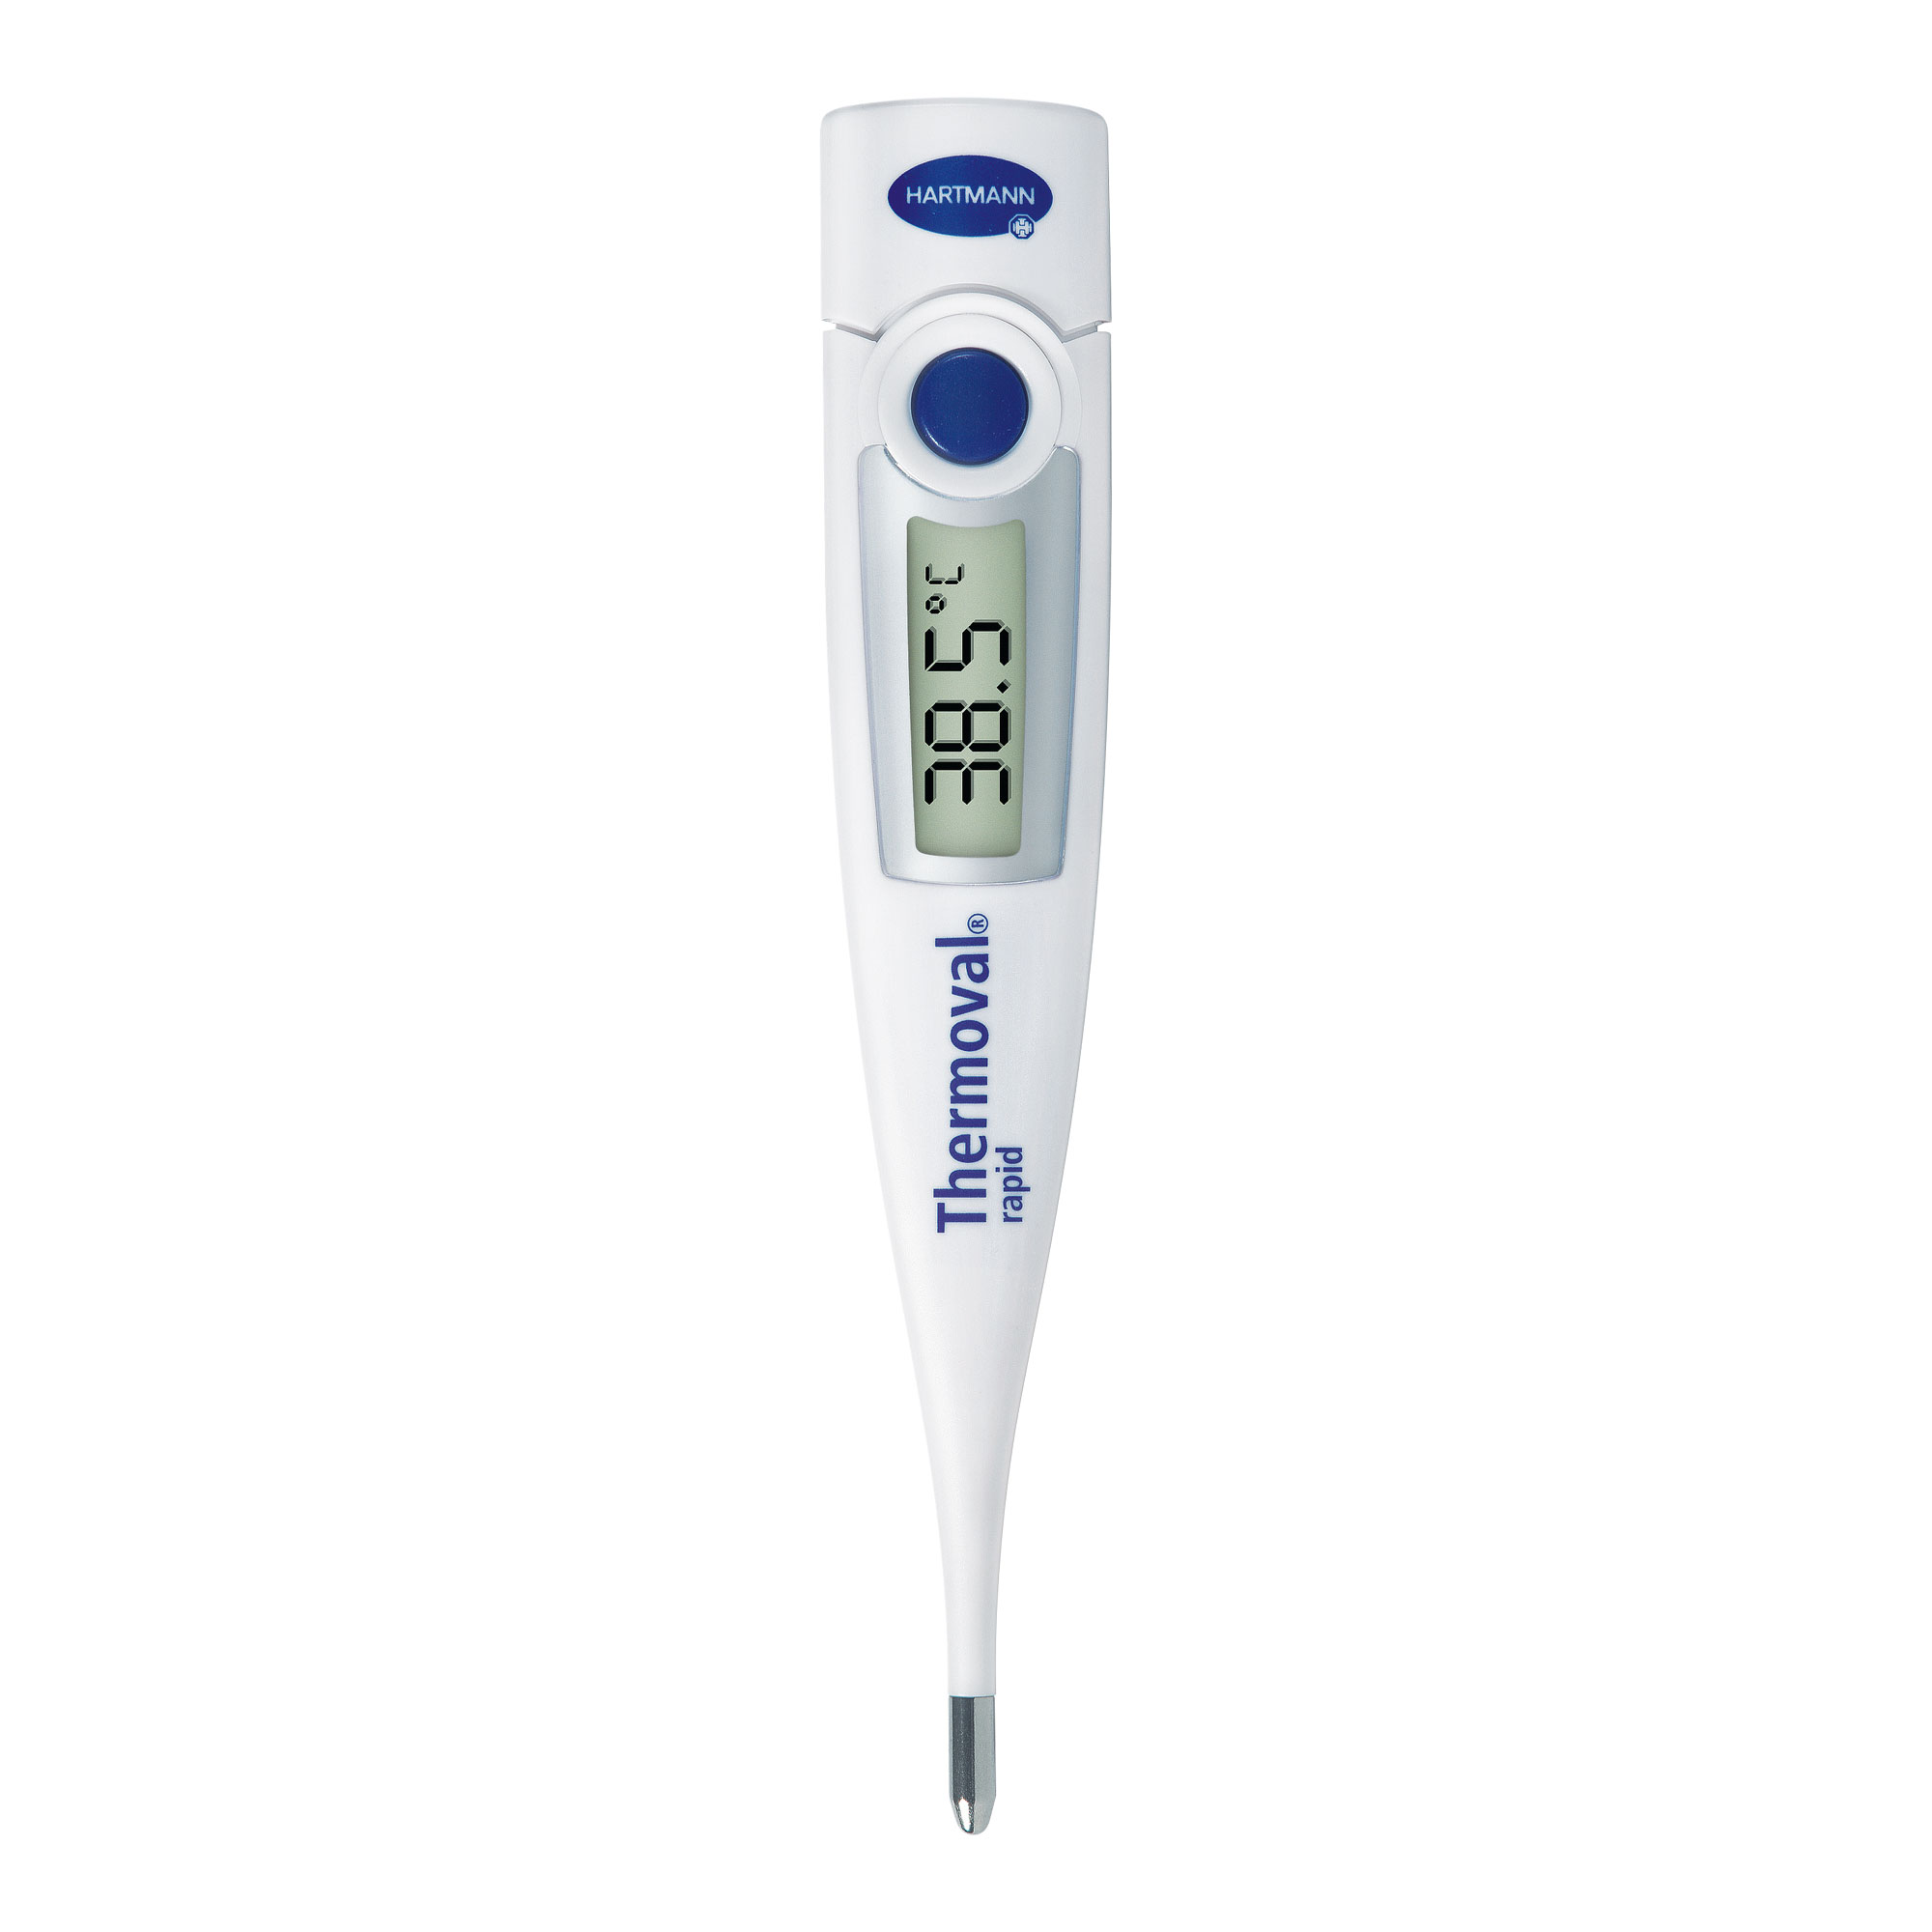 Thermoval rapid Fieberthermometer ohne Umverpackung